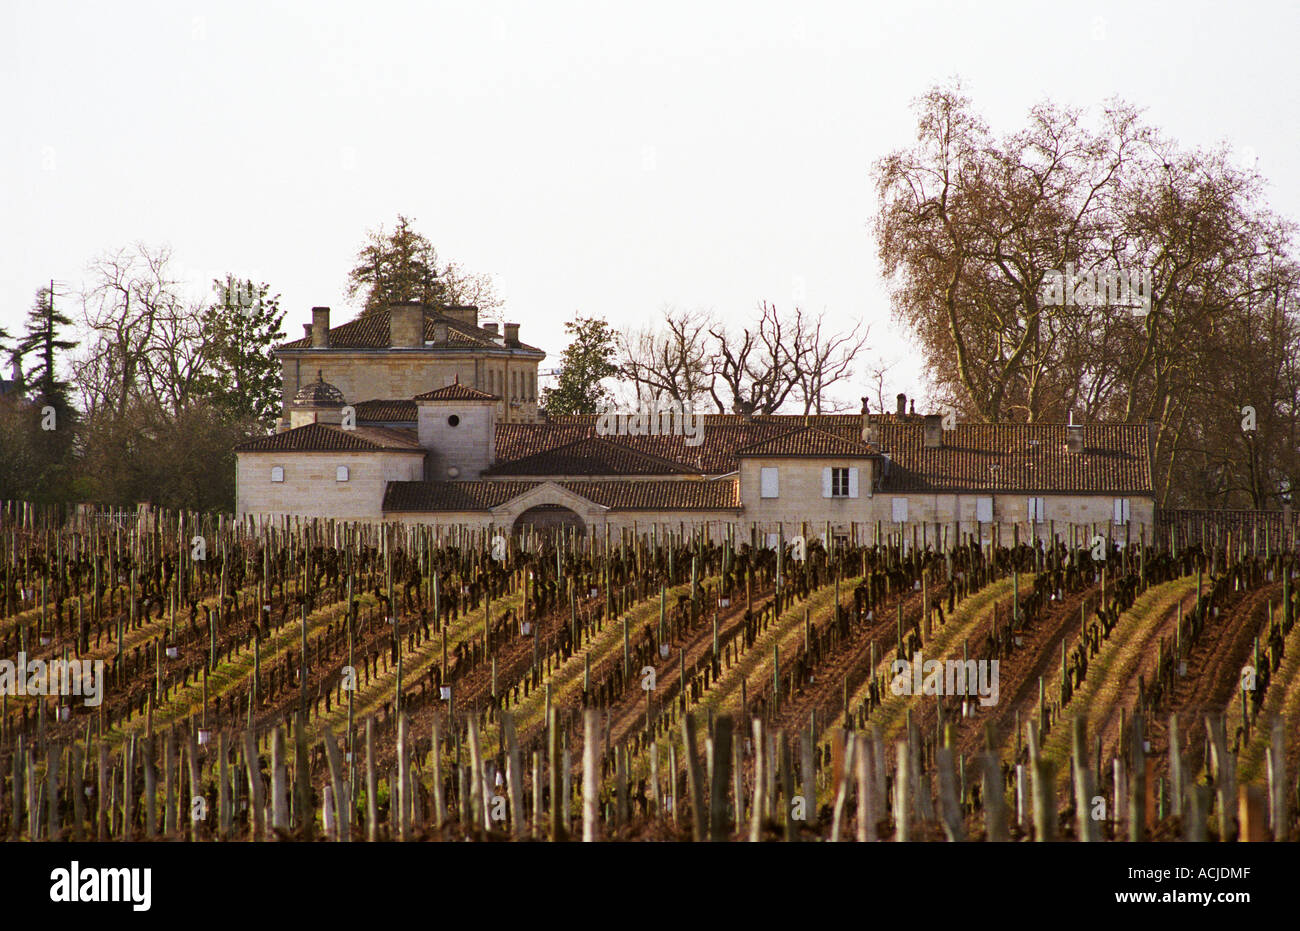 A view over the vineyard and chateau of Chateau Figeac in Saint Emilion in winter time when there are no leaves on the vines, St Émilion Gironde France Saint Émilion Bordeaux Gironde Aquitaine France Europe Stock Photo